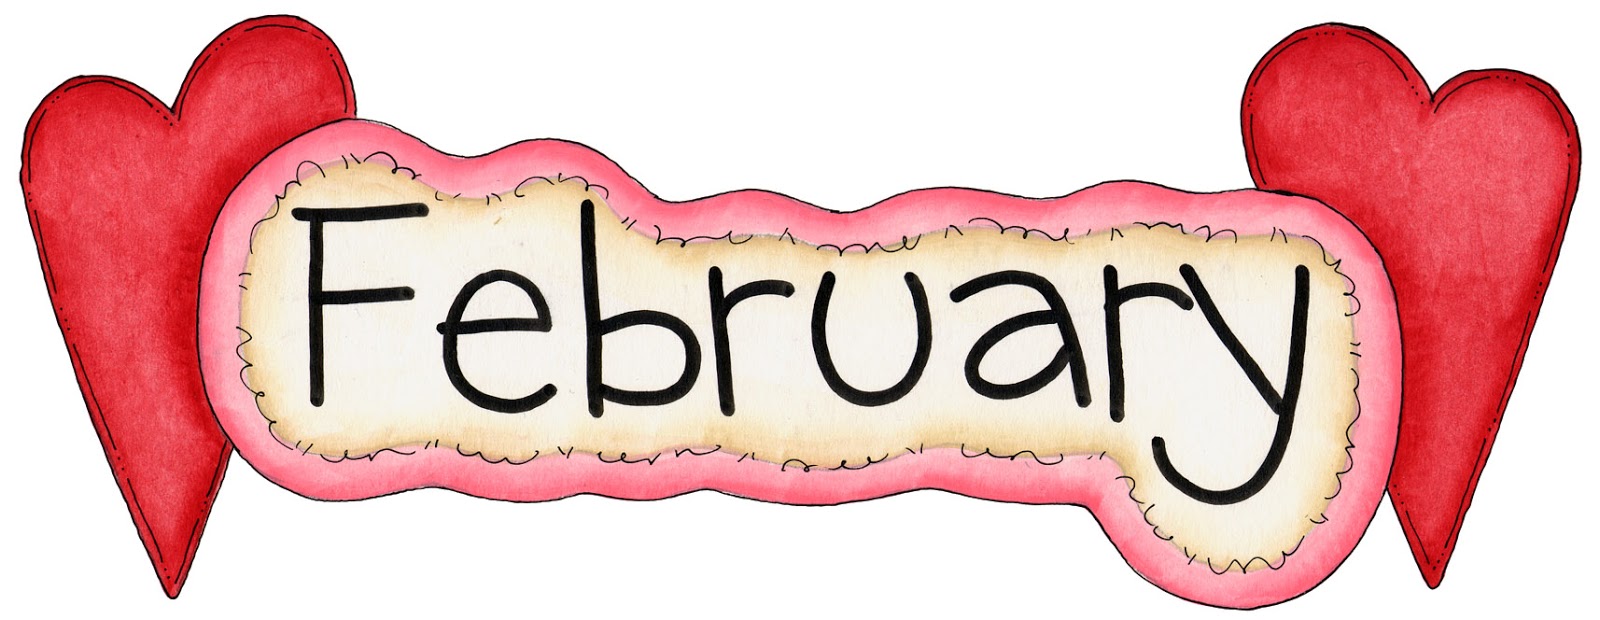 February clip art images . - February Clipart Free